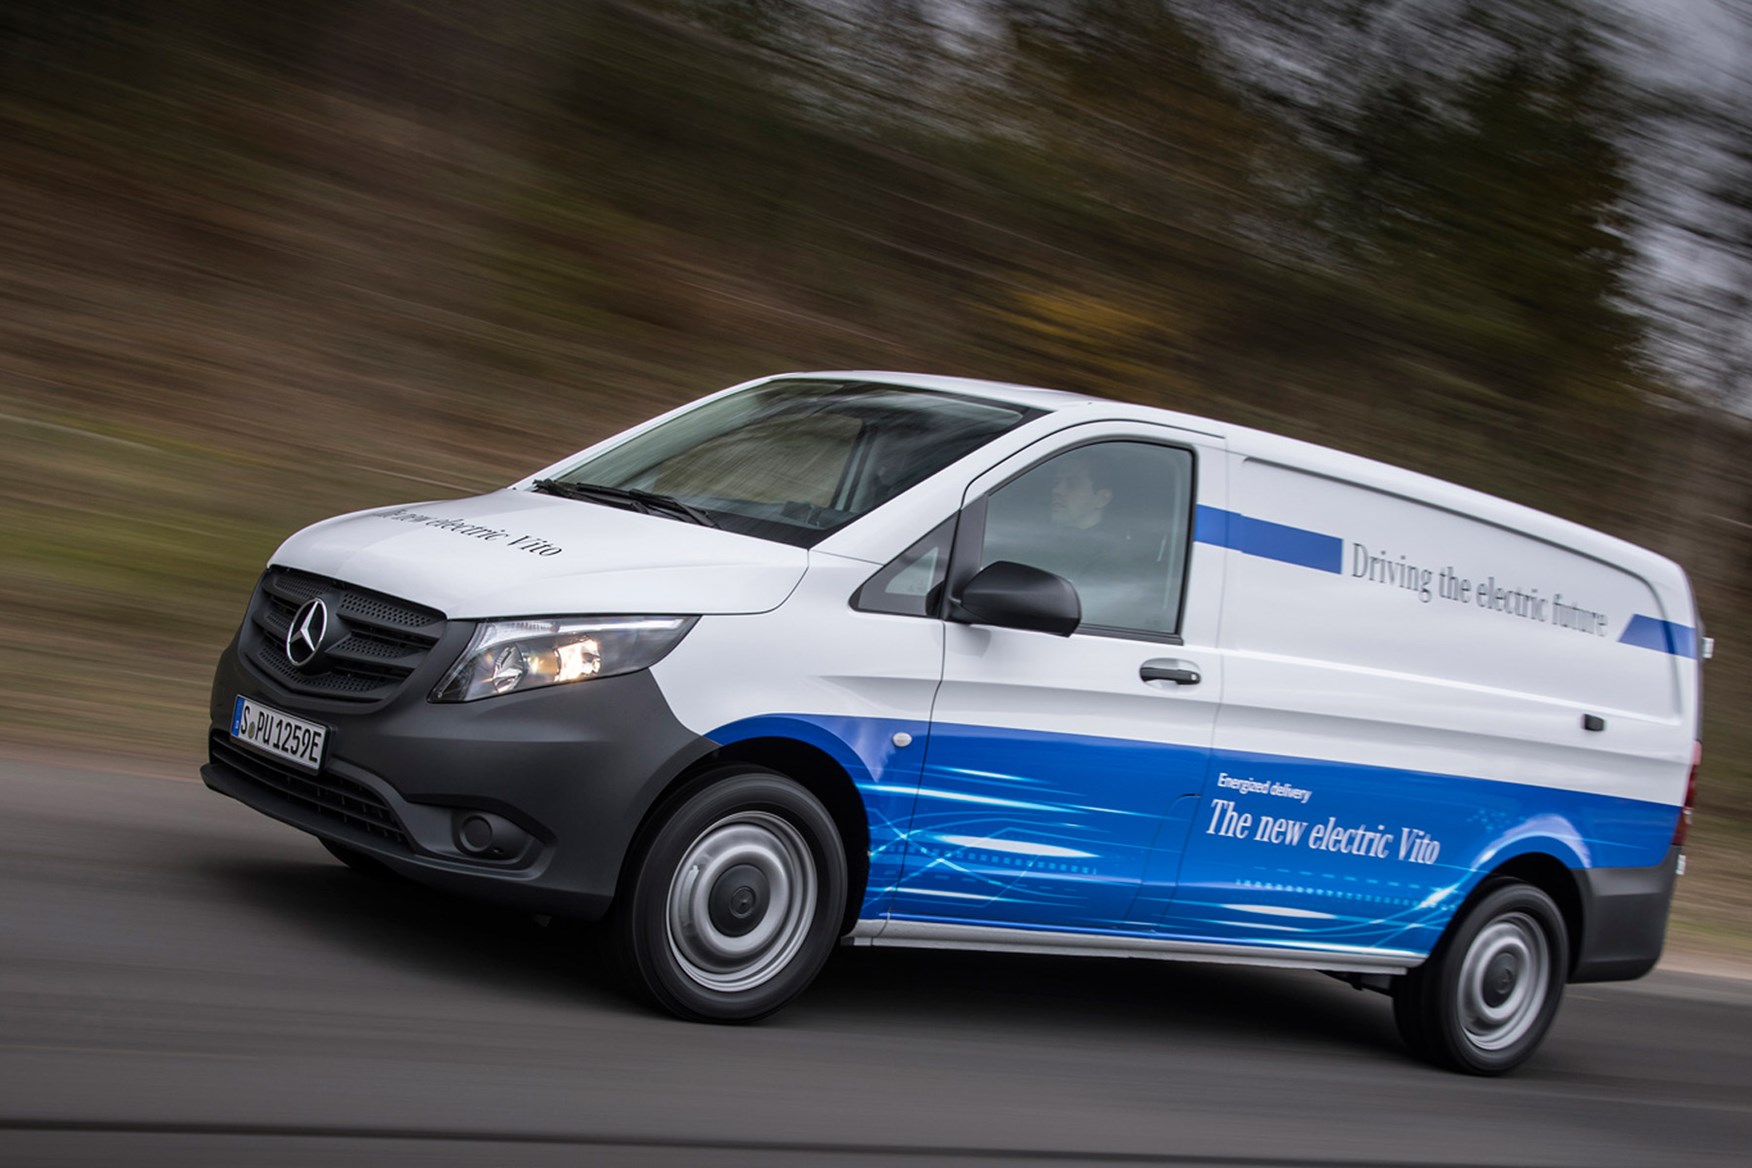 Mercedes-Benz Vito full review on Parkers Vans - eVito